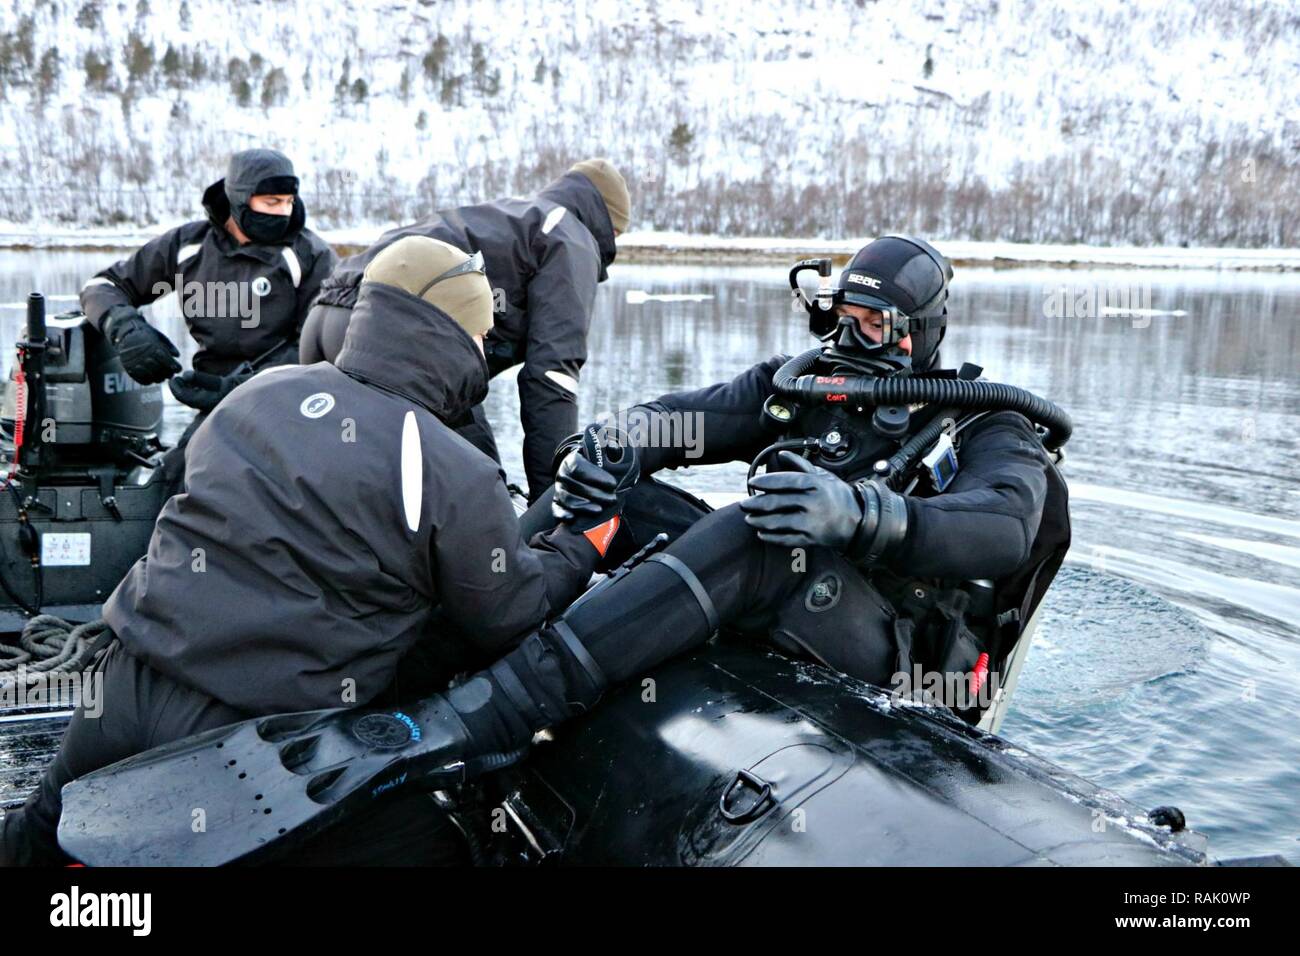 RAMSUND, Norway (Feb. 9, 2017) Lt. Benjamin Fernandez, center, company commander of Explosive Ordnance Disposal Mobile Unit (EODMU) 8 Mine Countermeasures (MCM) Company, conducts a cold water MCM neutralization dive. EODMU-8 is participating in Exercise Arctic Specialist 2017, a multi-national EOD exercise conducted in the austere environments of northern Norway. Stock Photo